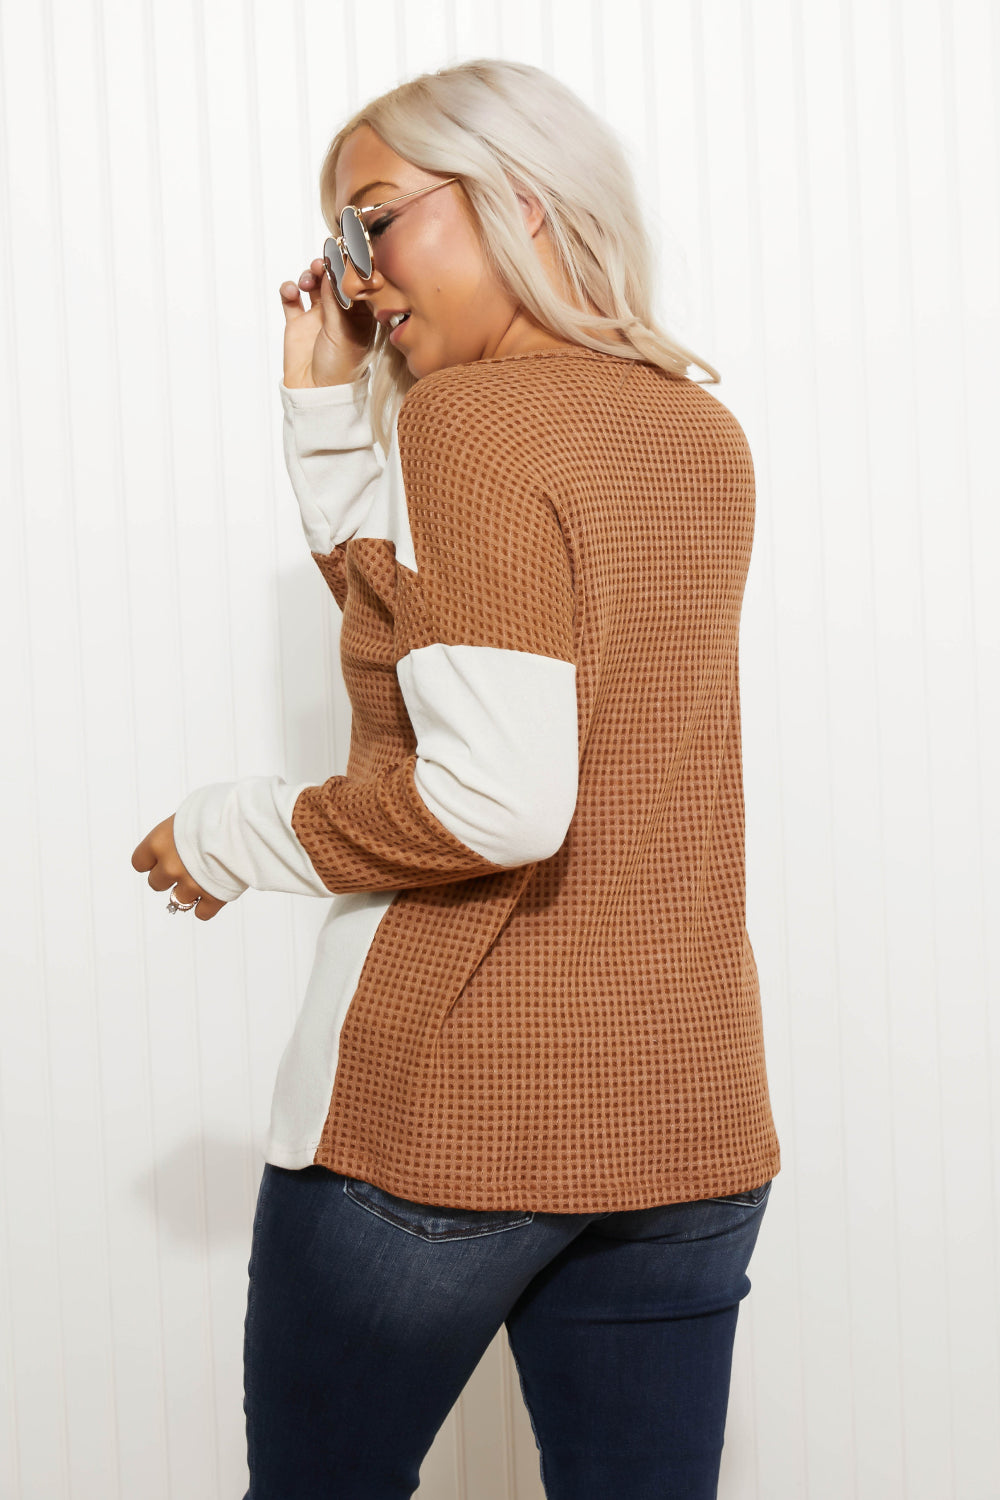 COCO AND WHIP WAFFLE LONG SLEEVED SHIRT